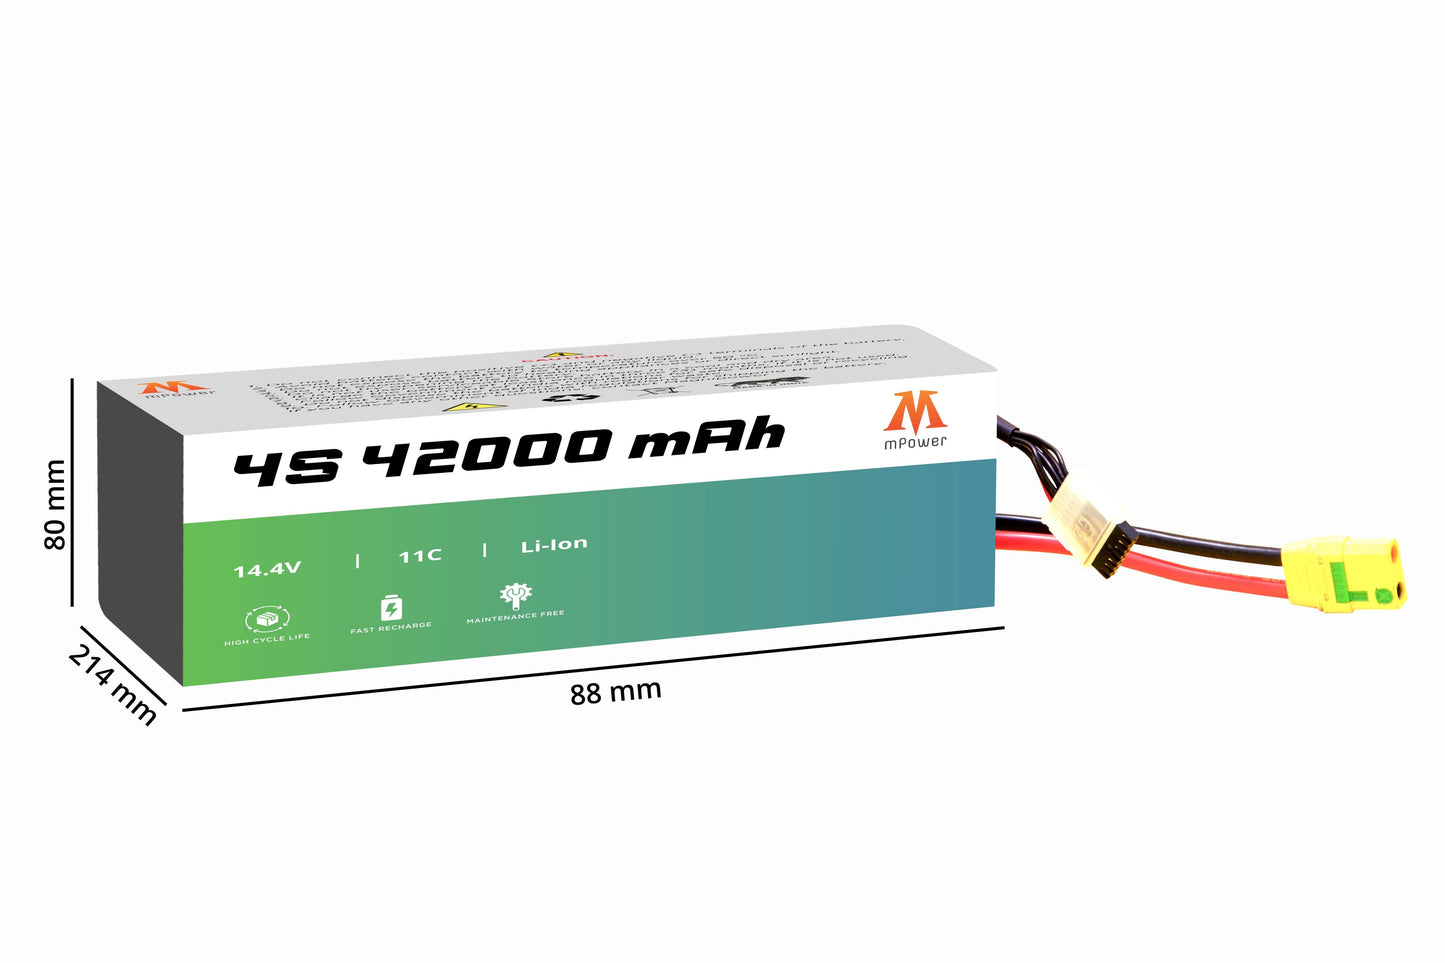 mPower 4S 42000mAh Lithium-Ion Battery for Survey Drones